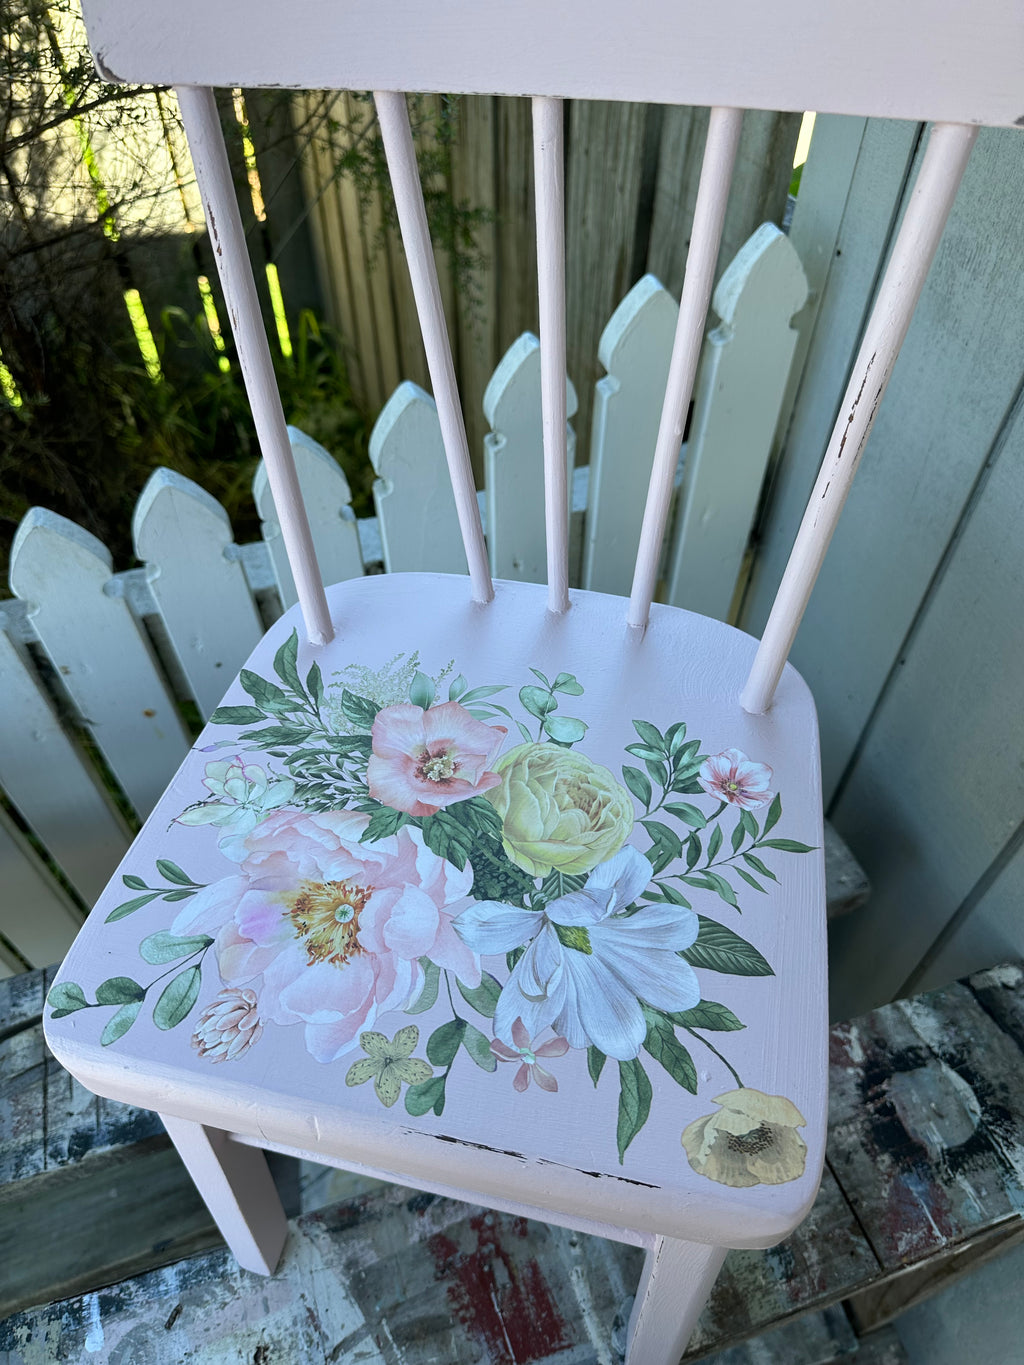 Small Pink Shabby Chic chair - painted ex the PMV studio